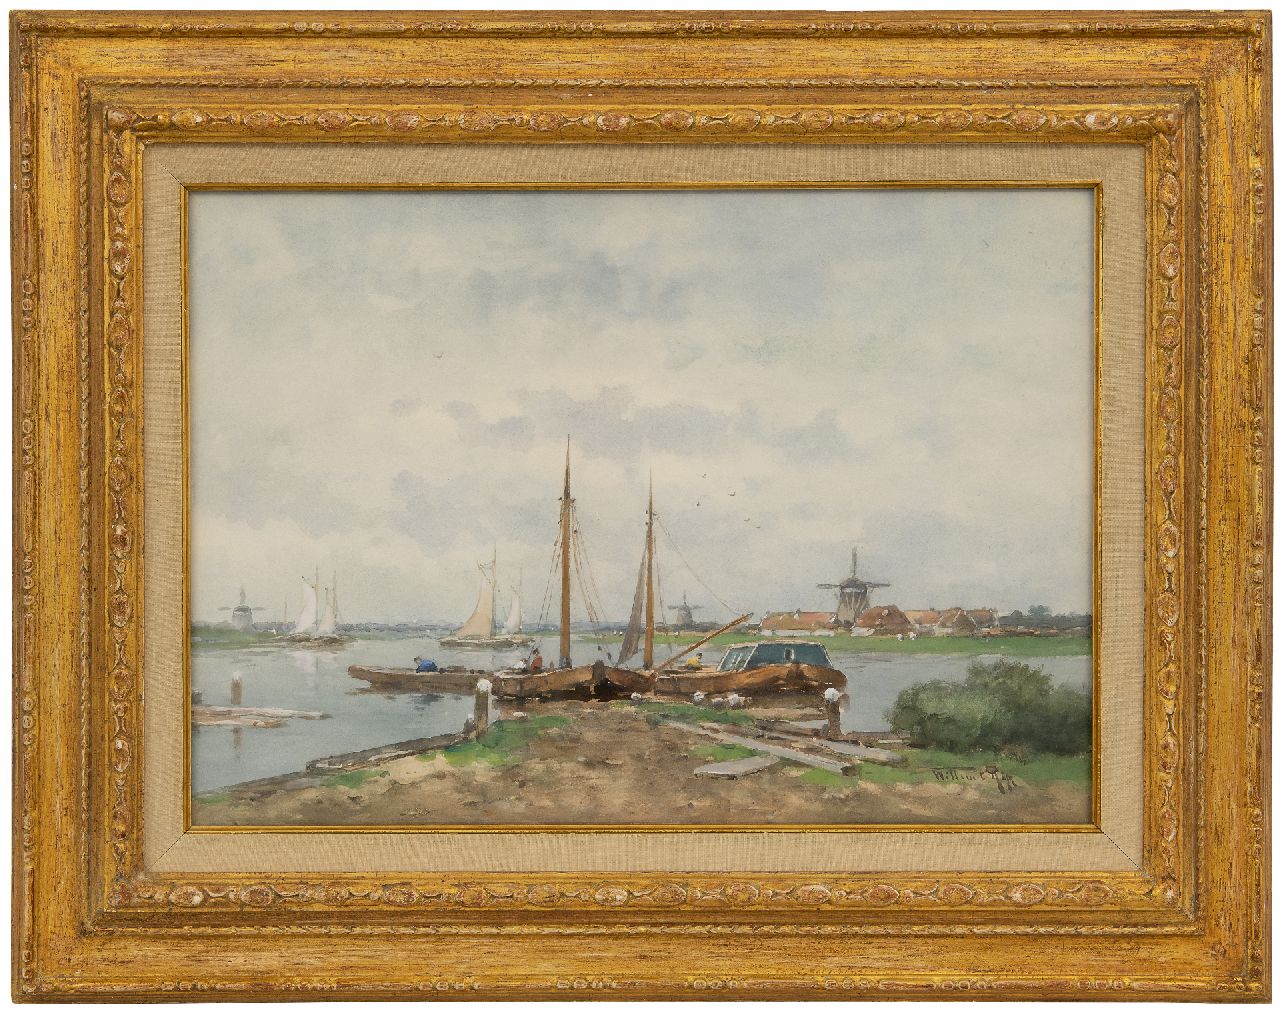 Rip W.C.  | 'Willem' Cornelis Rip | Watercolours and drawings offered for sale | River landscape with moored barges, watercolour on paper 35.5 x 50.7 cm, signed l.r.